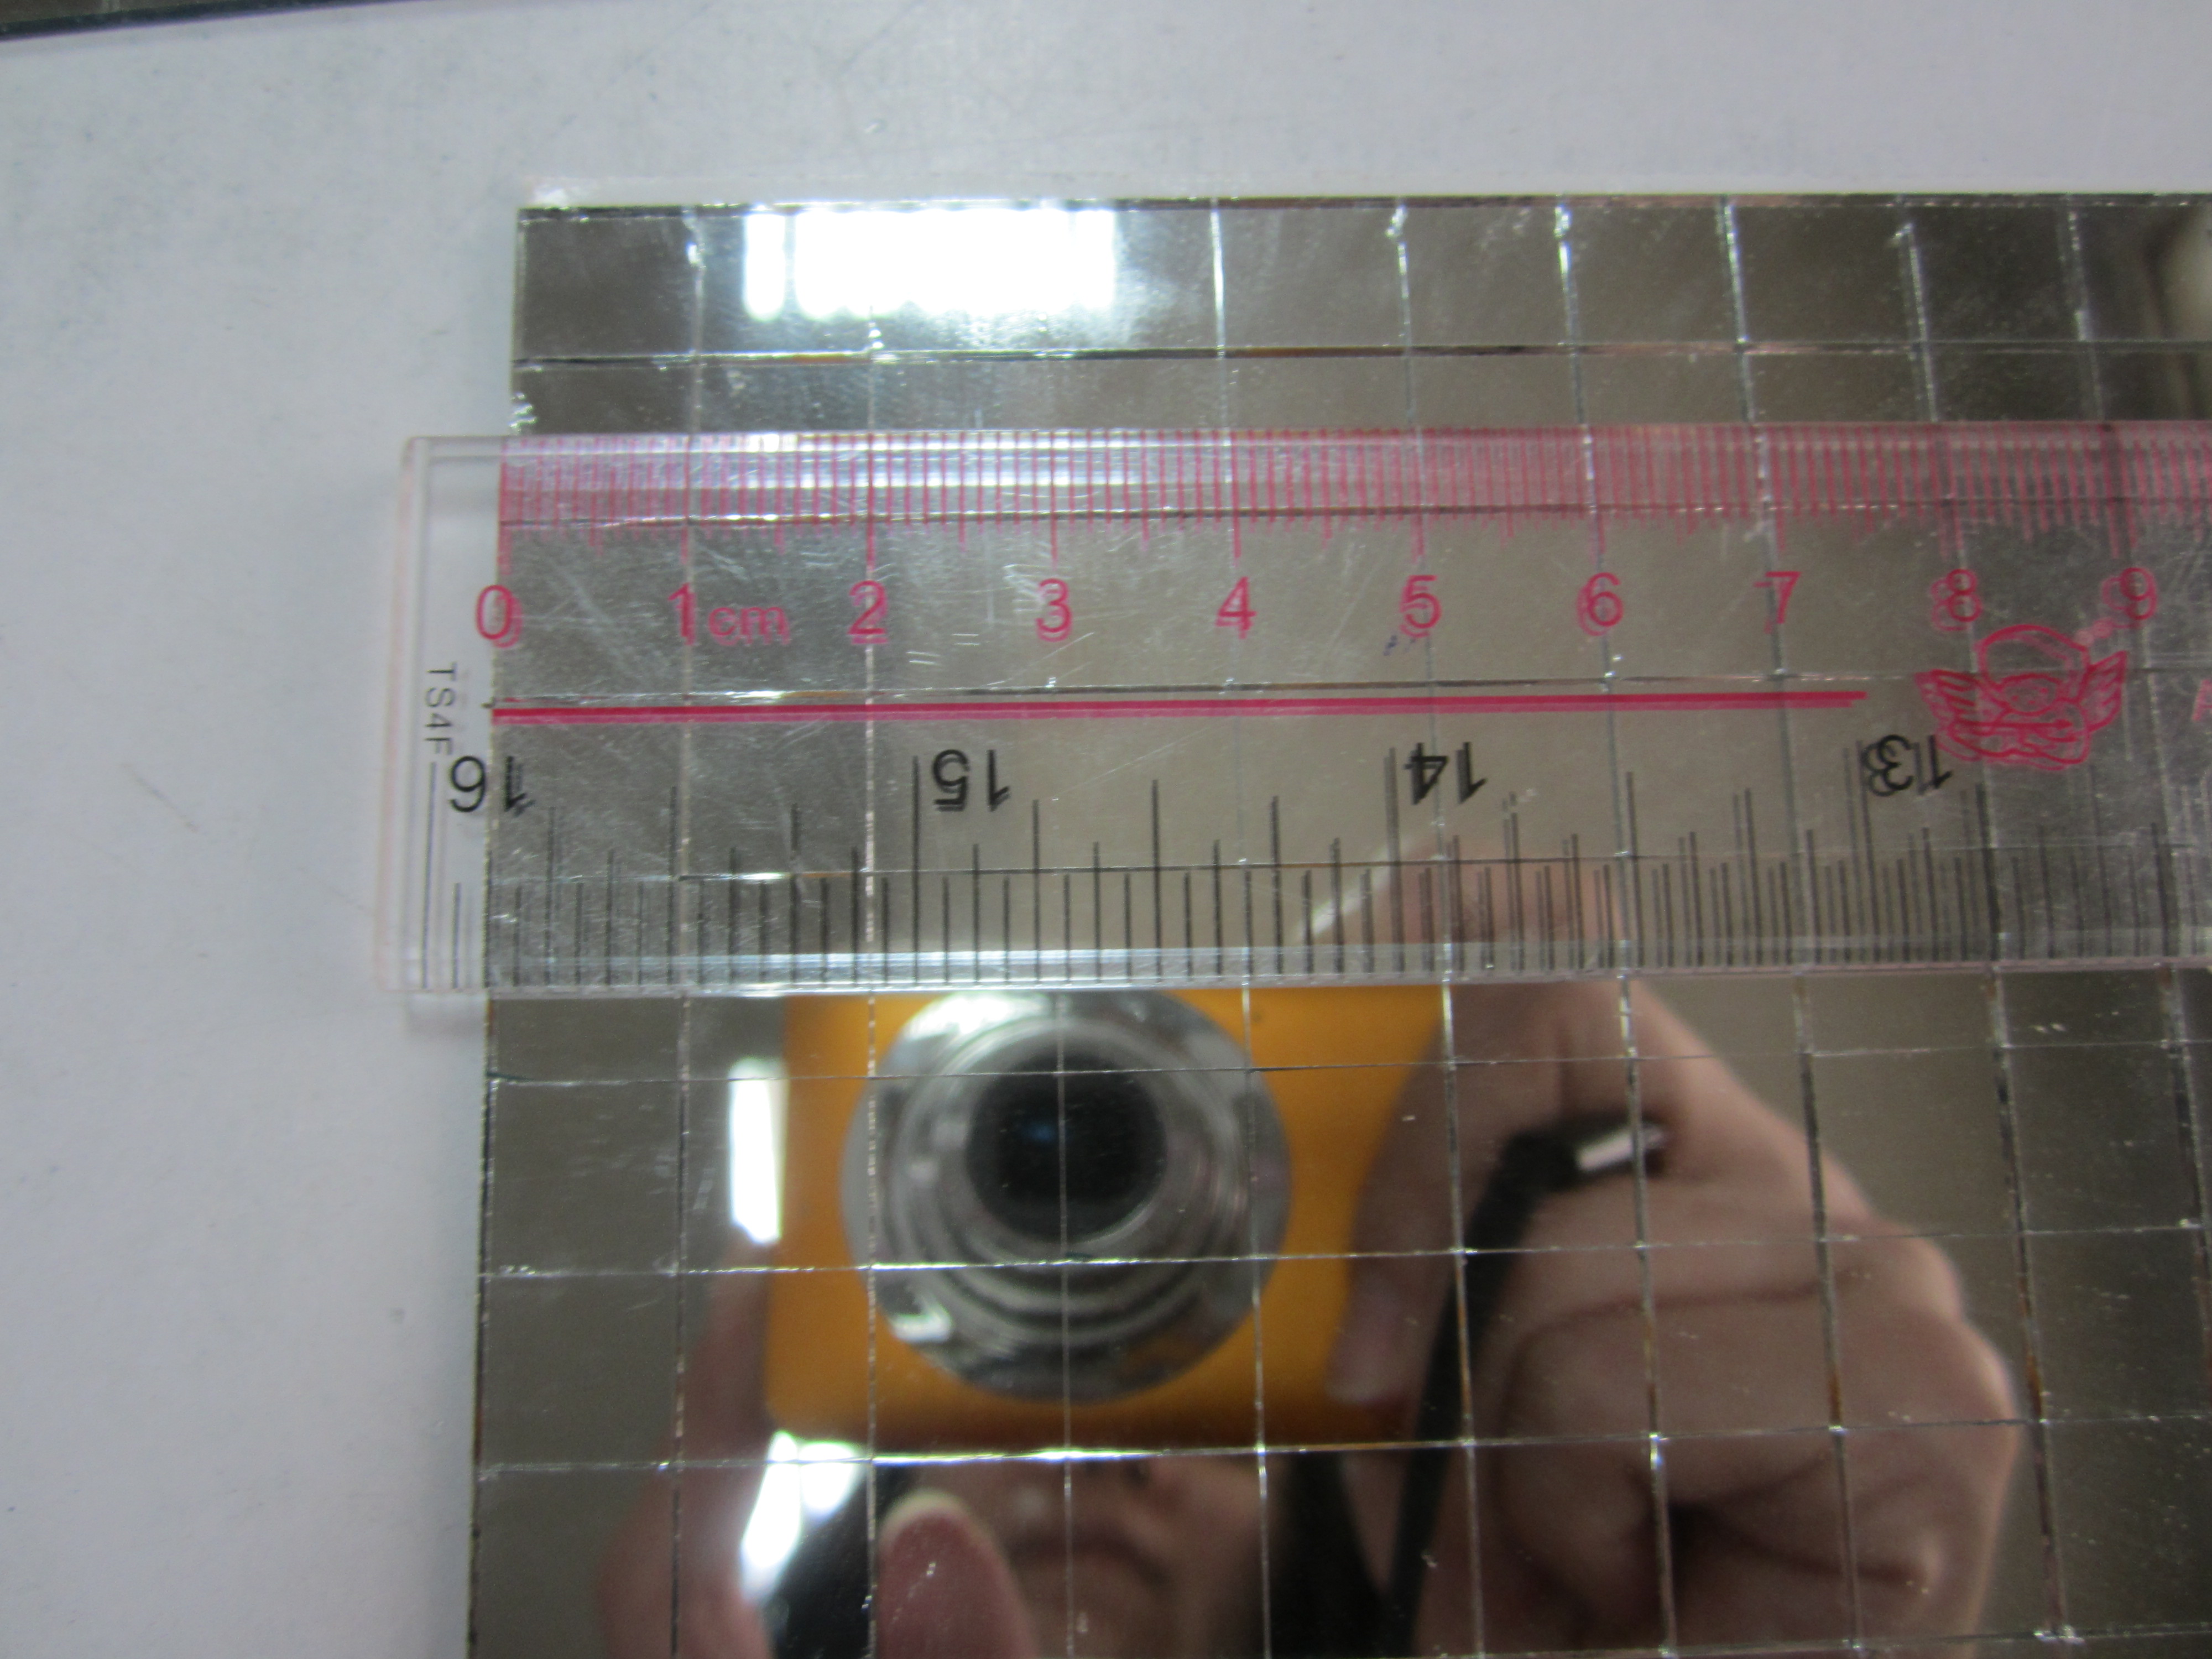 Self-adhesive mini mirror glass mosaic tile in roll for craft kit